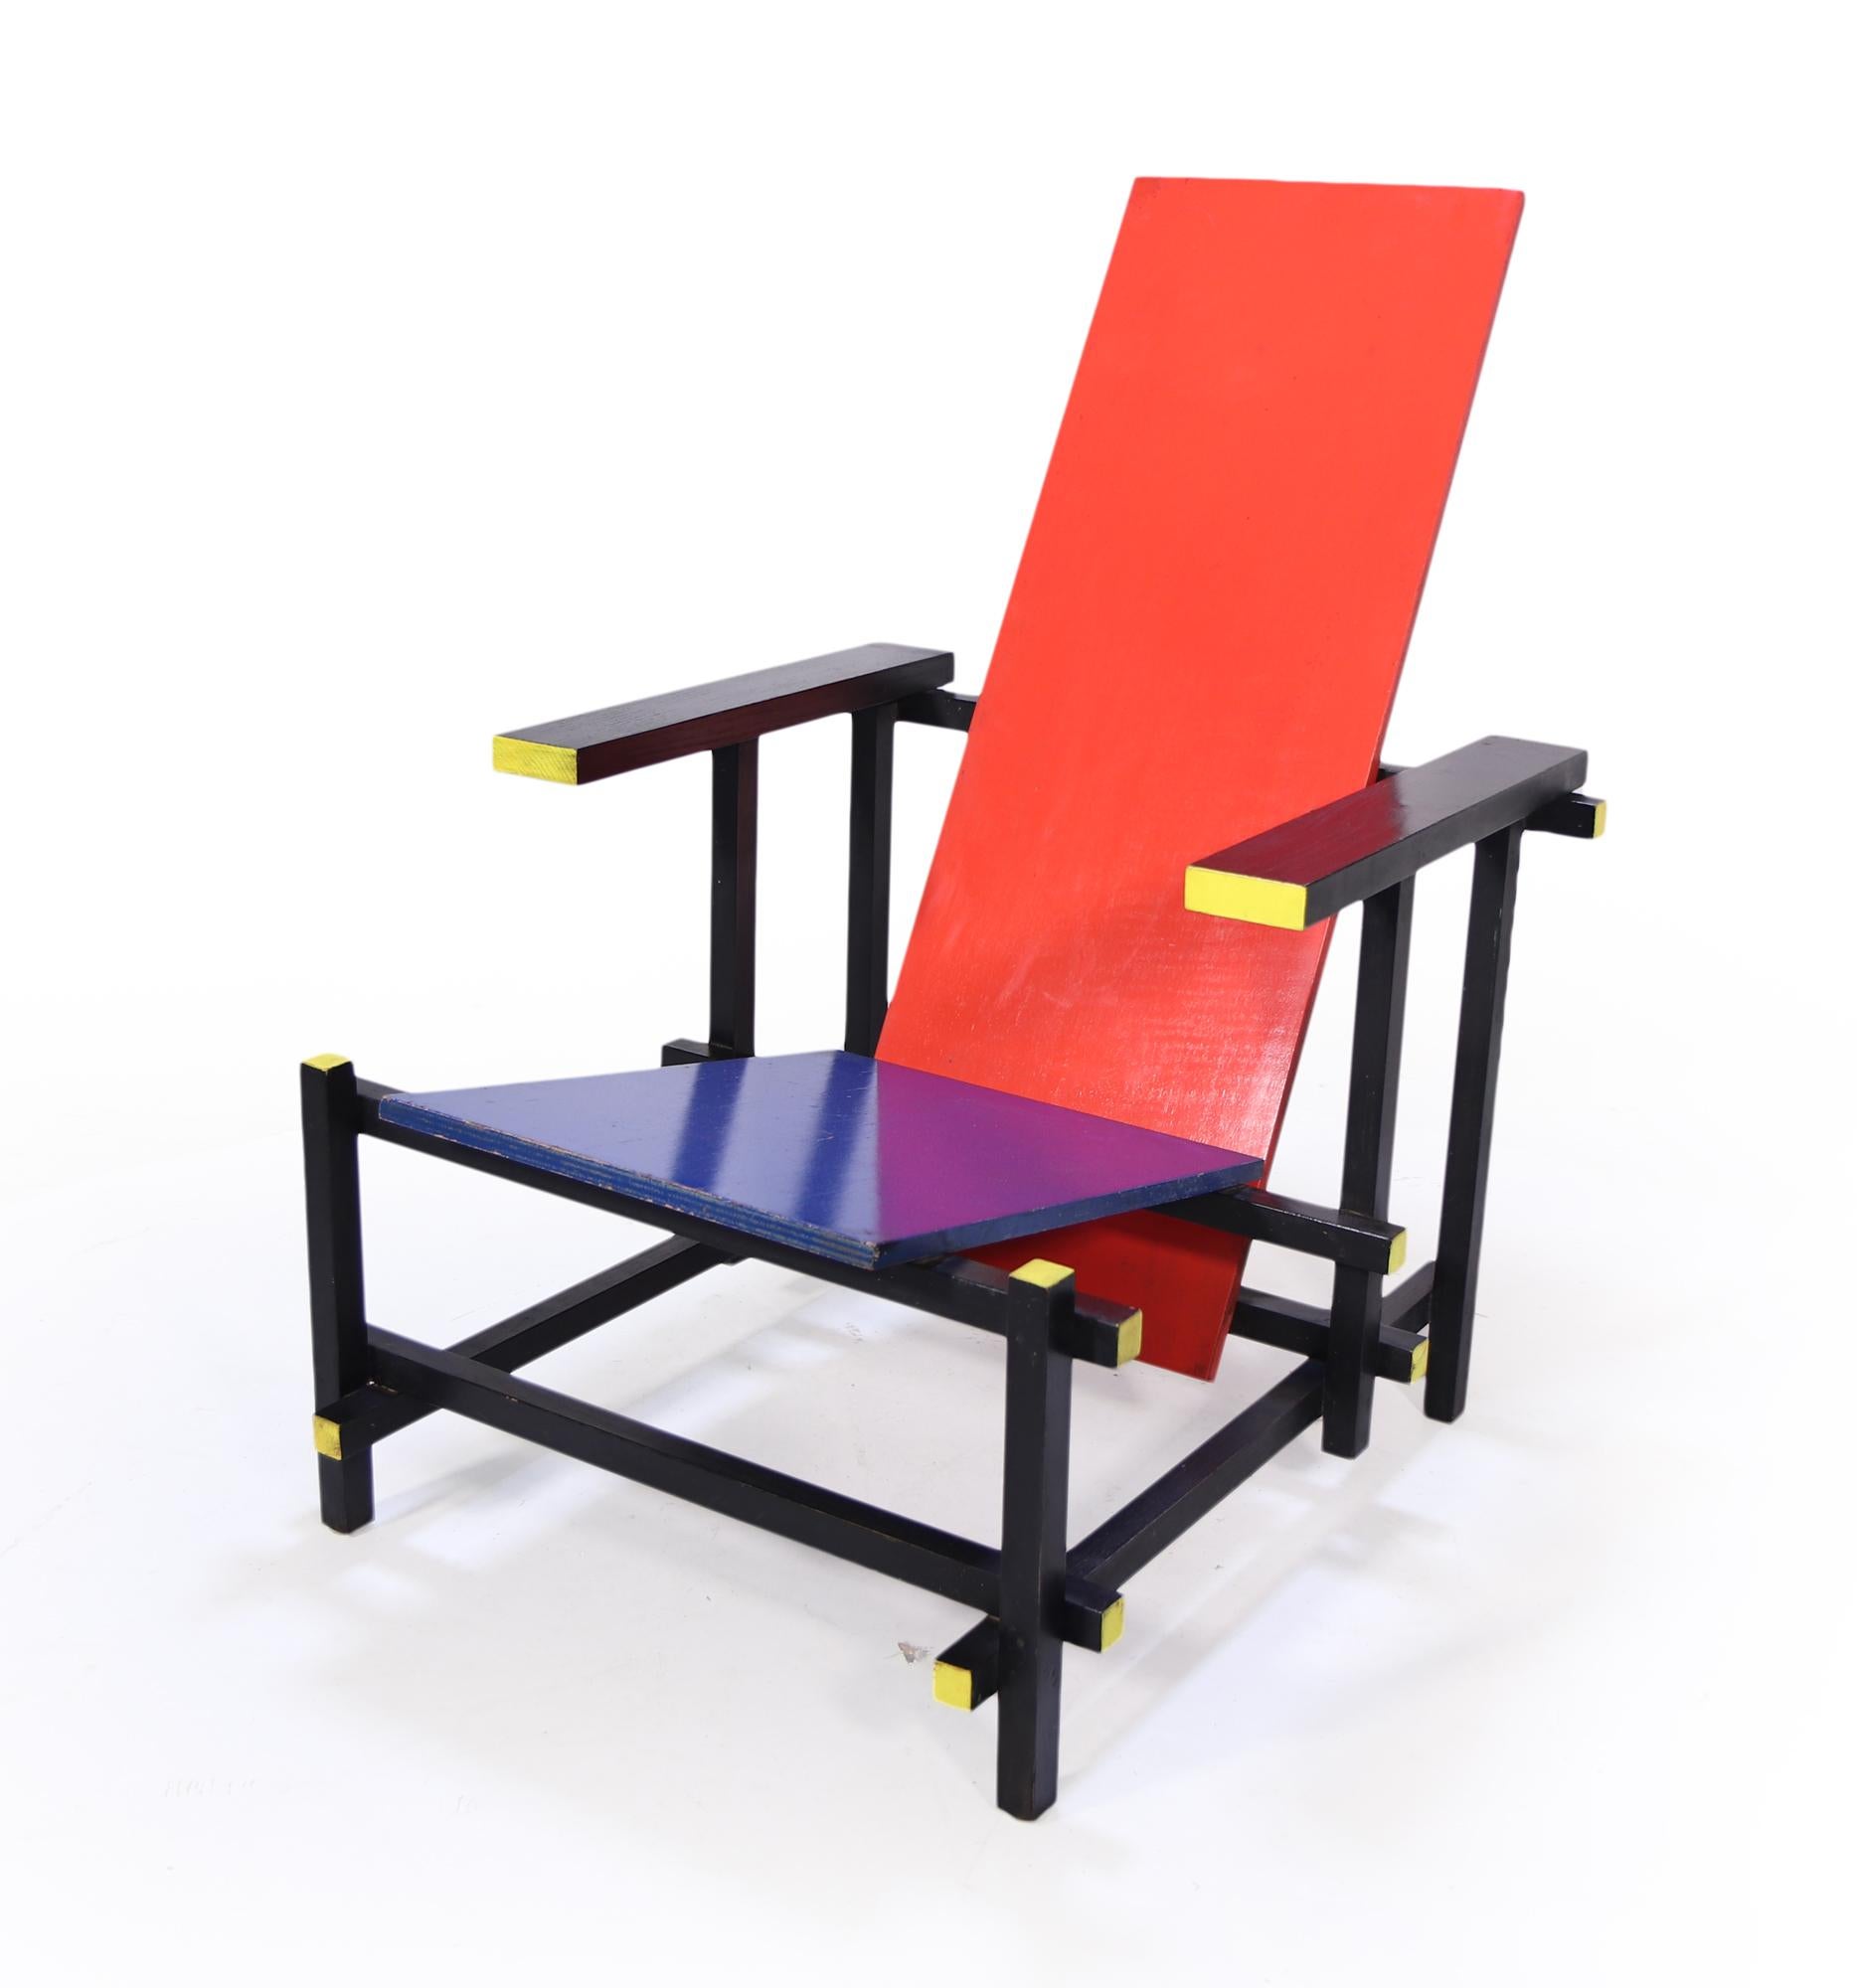 Originally designed in 1918 by Gerrit Rietveld from the ‘De Styijl’ art movement from this period, this example is from the 1970’s and possibly made by Dutch cabinet maker Gerard Groenkan, the chair has age related wear and patina, the structure is